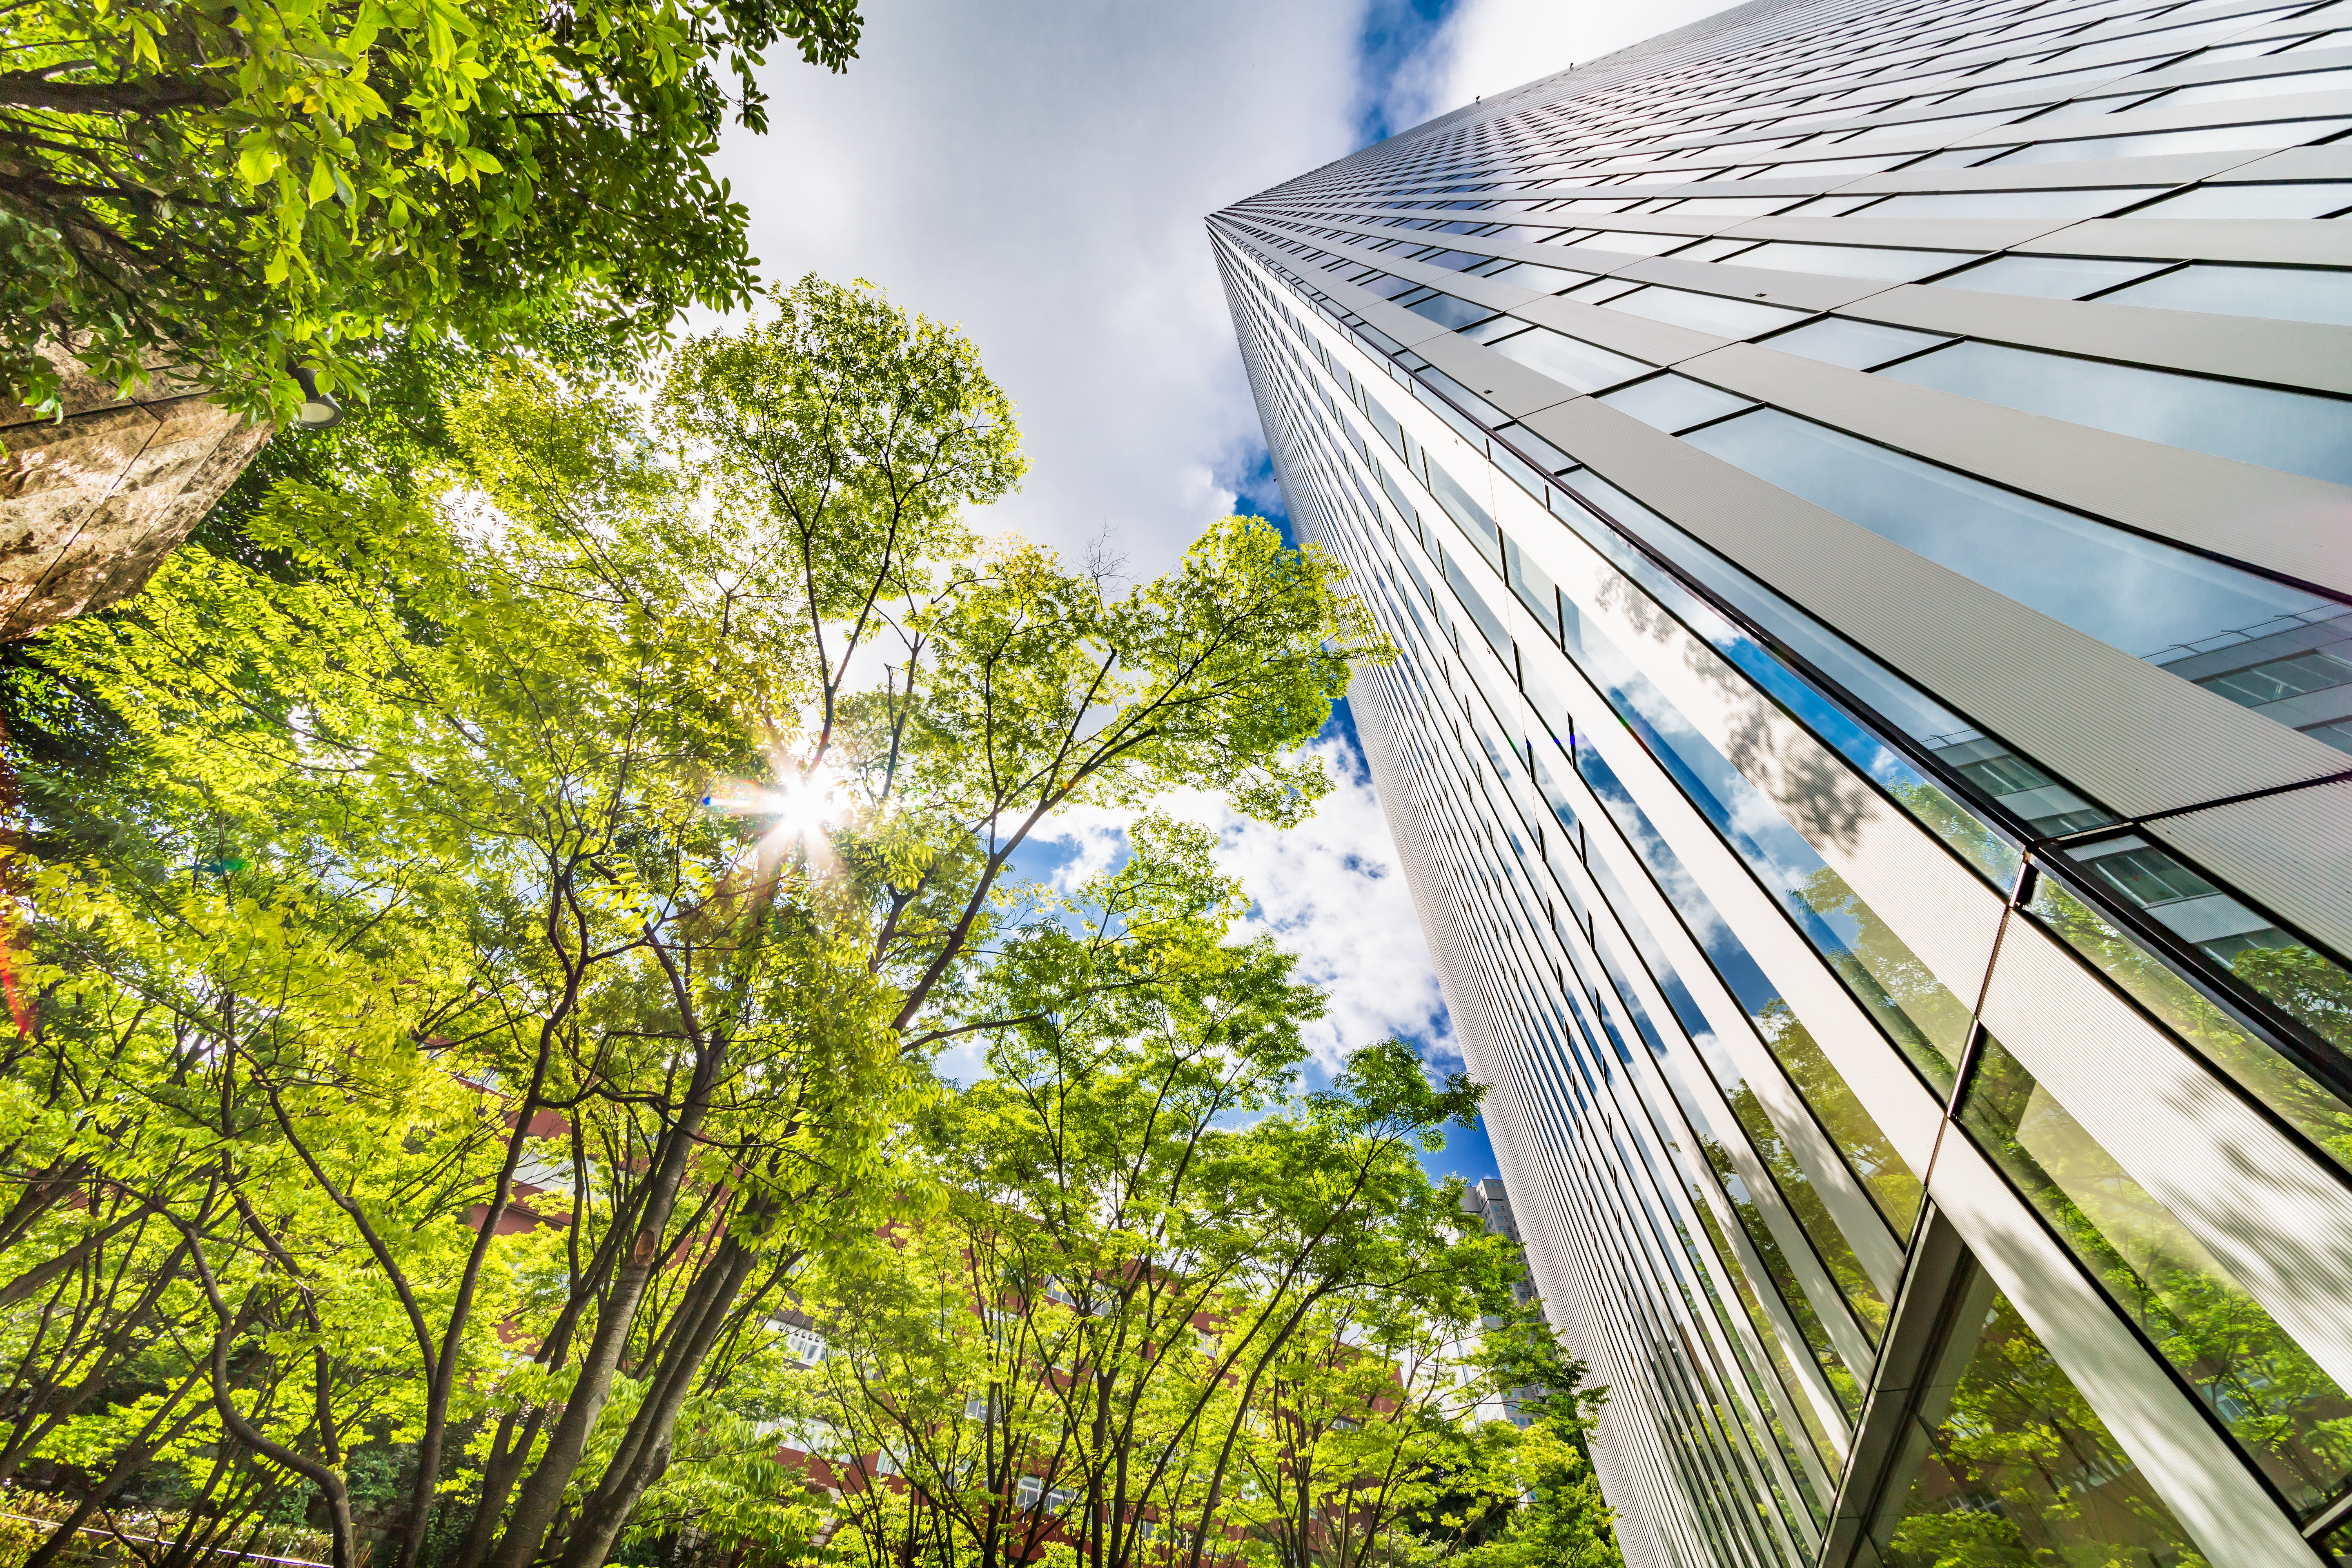 Flexible workspaces can help commercial real estate 'go green'